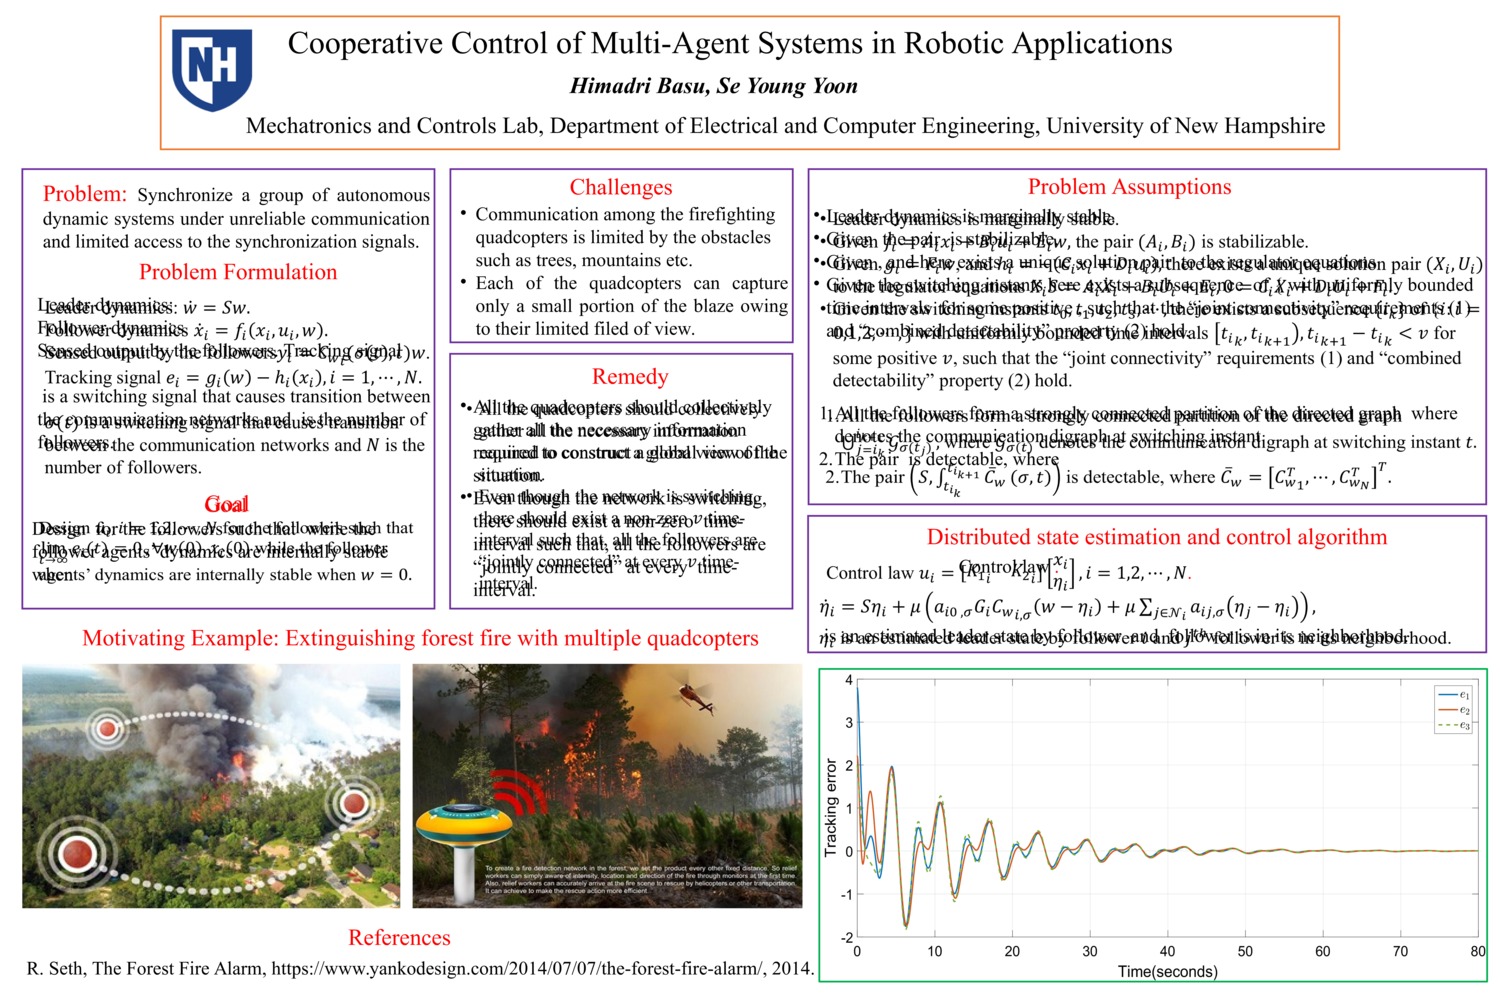 Cooperative Control Of Multi-Agent Systems In Robotic Applications by hb1039